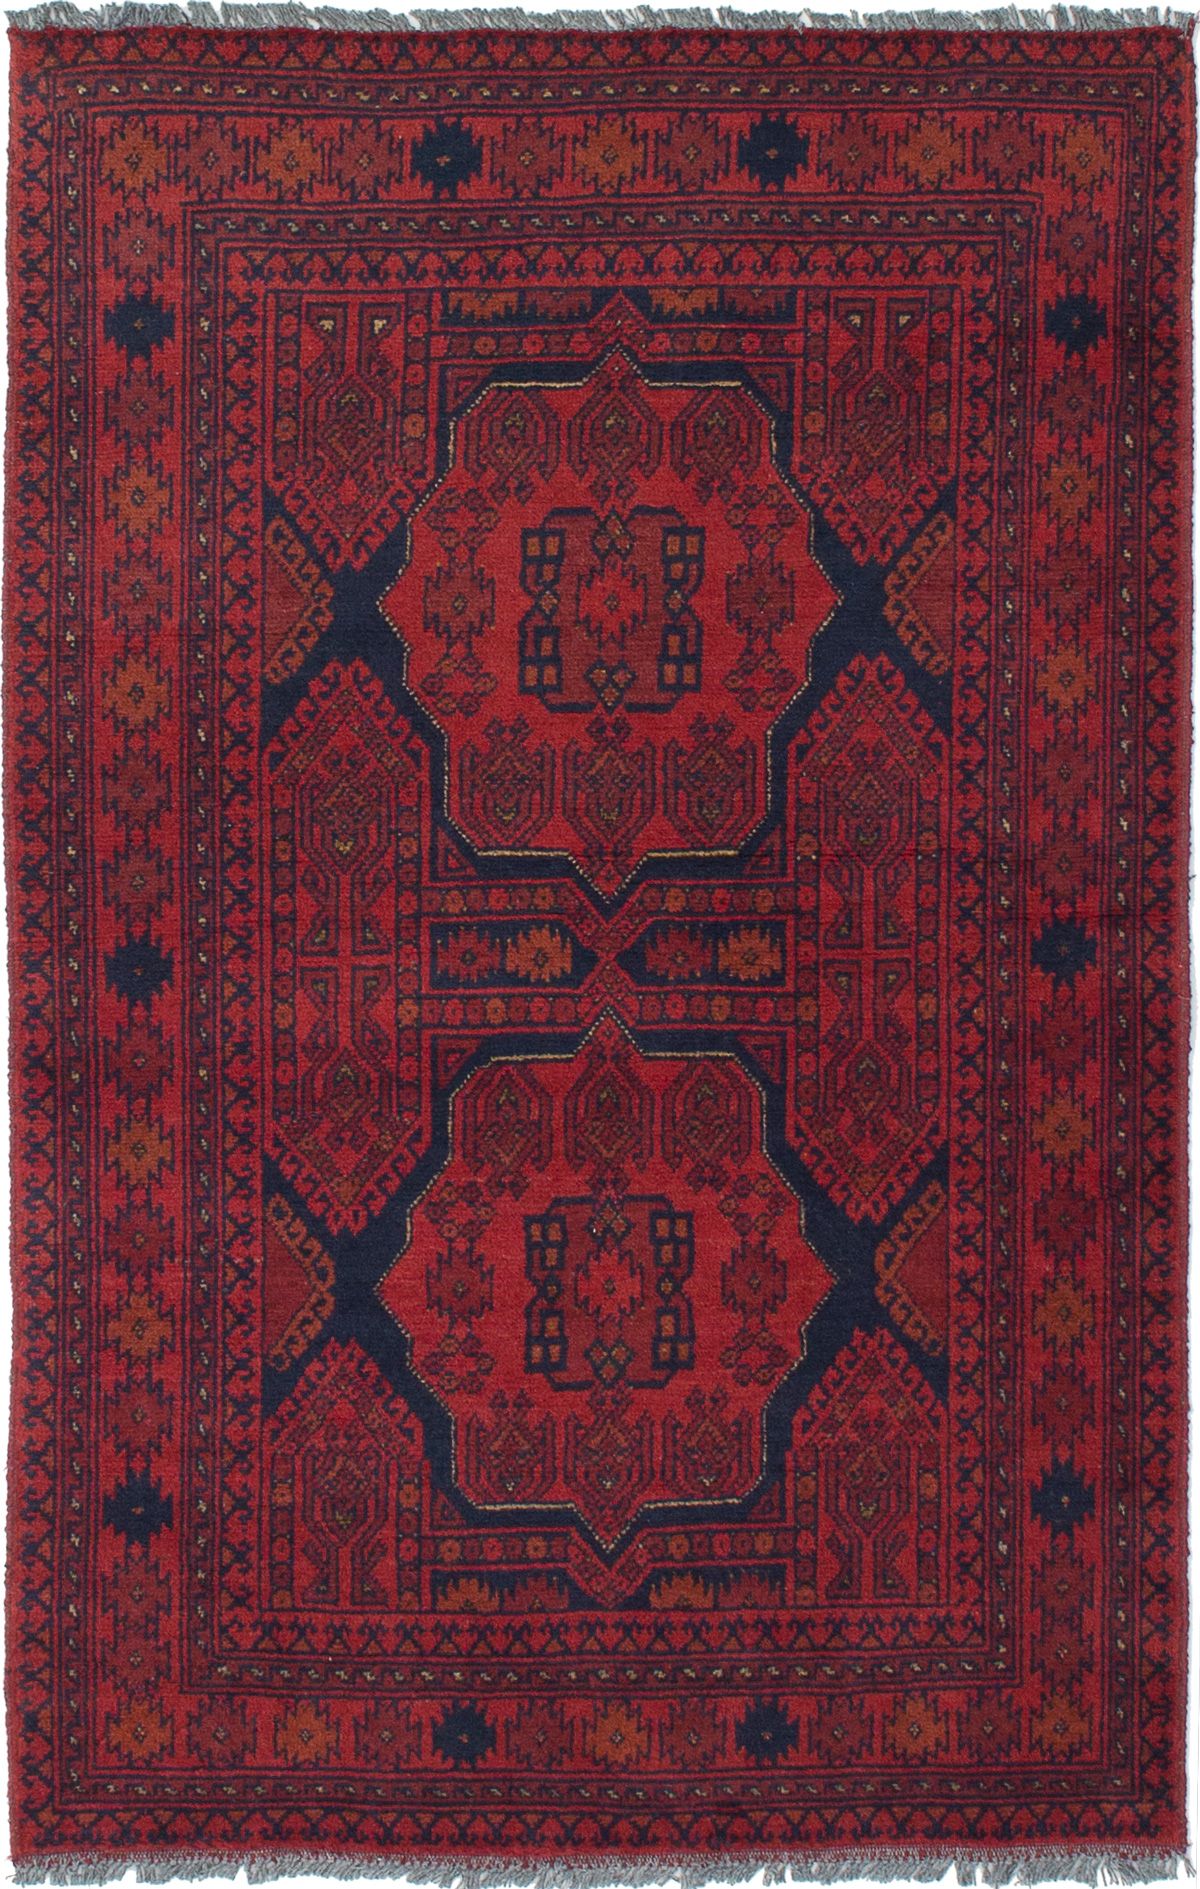 Hand-knotted Finest Khal Mohammadi Red Wool Rug 3'3" x 4'10" (25) Size: 3'3" x 4'10"  